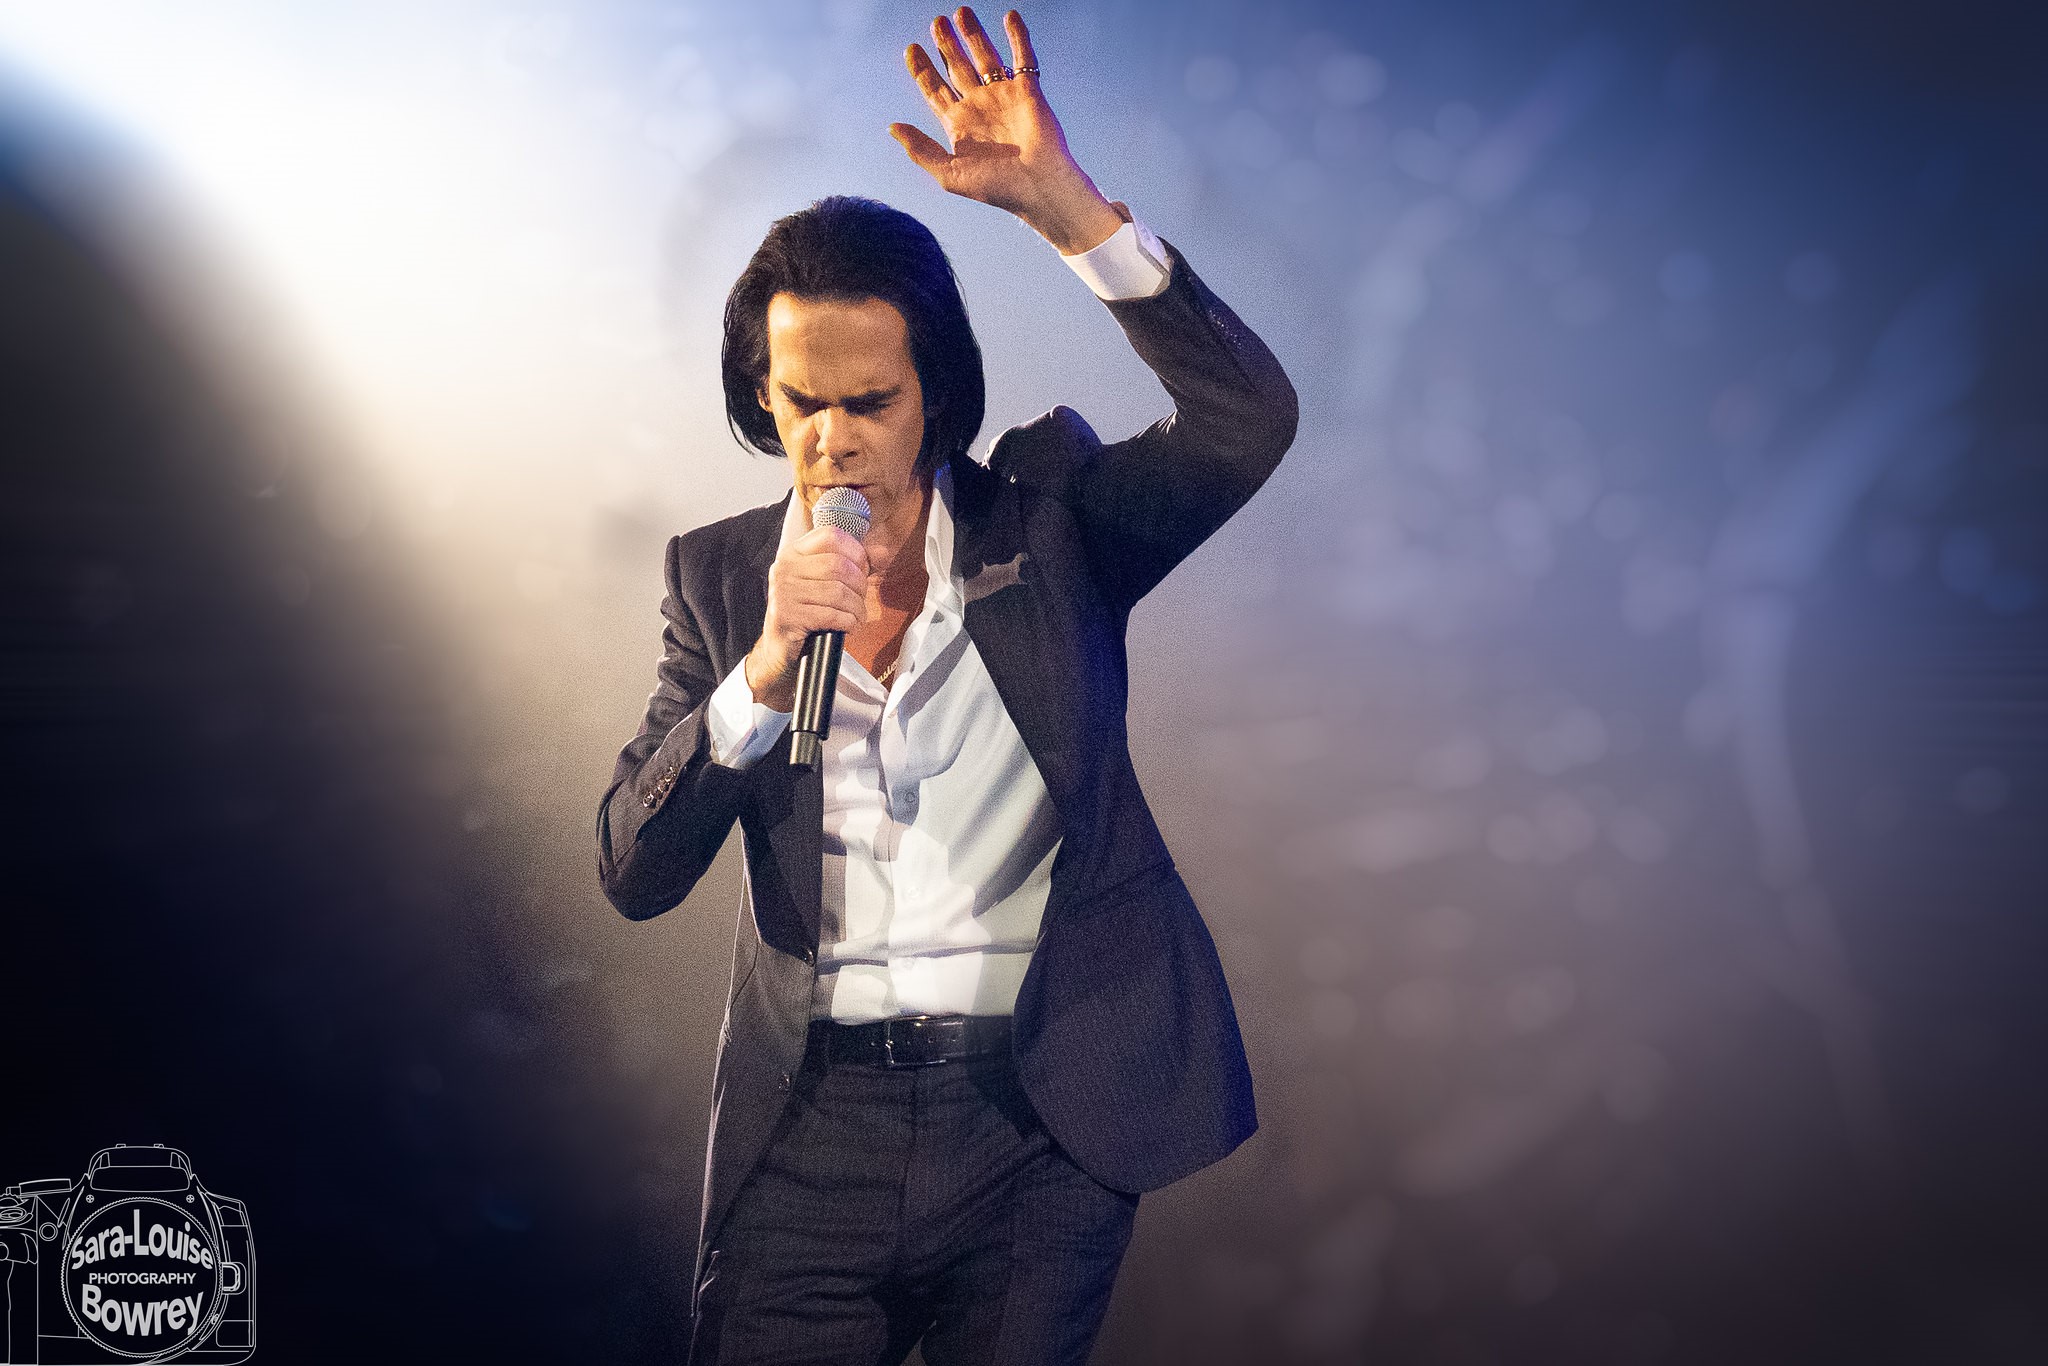 Nick Cave says he has ‘feelings of culpability’ over sons’ deaths